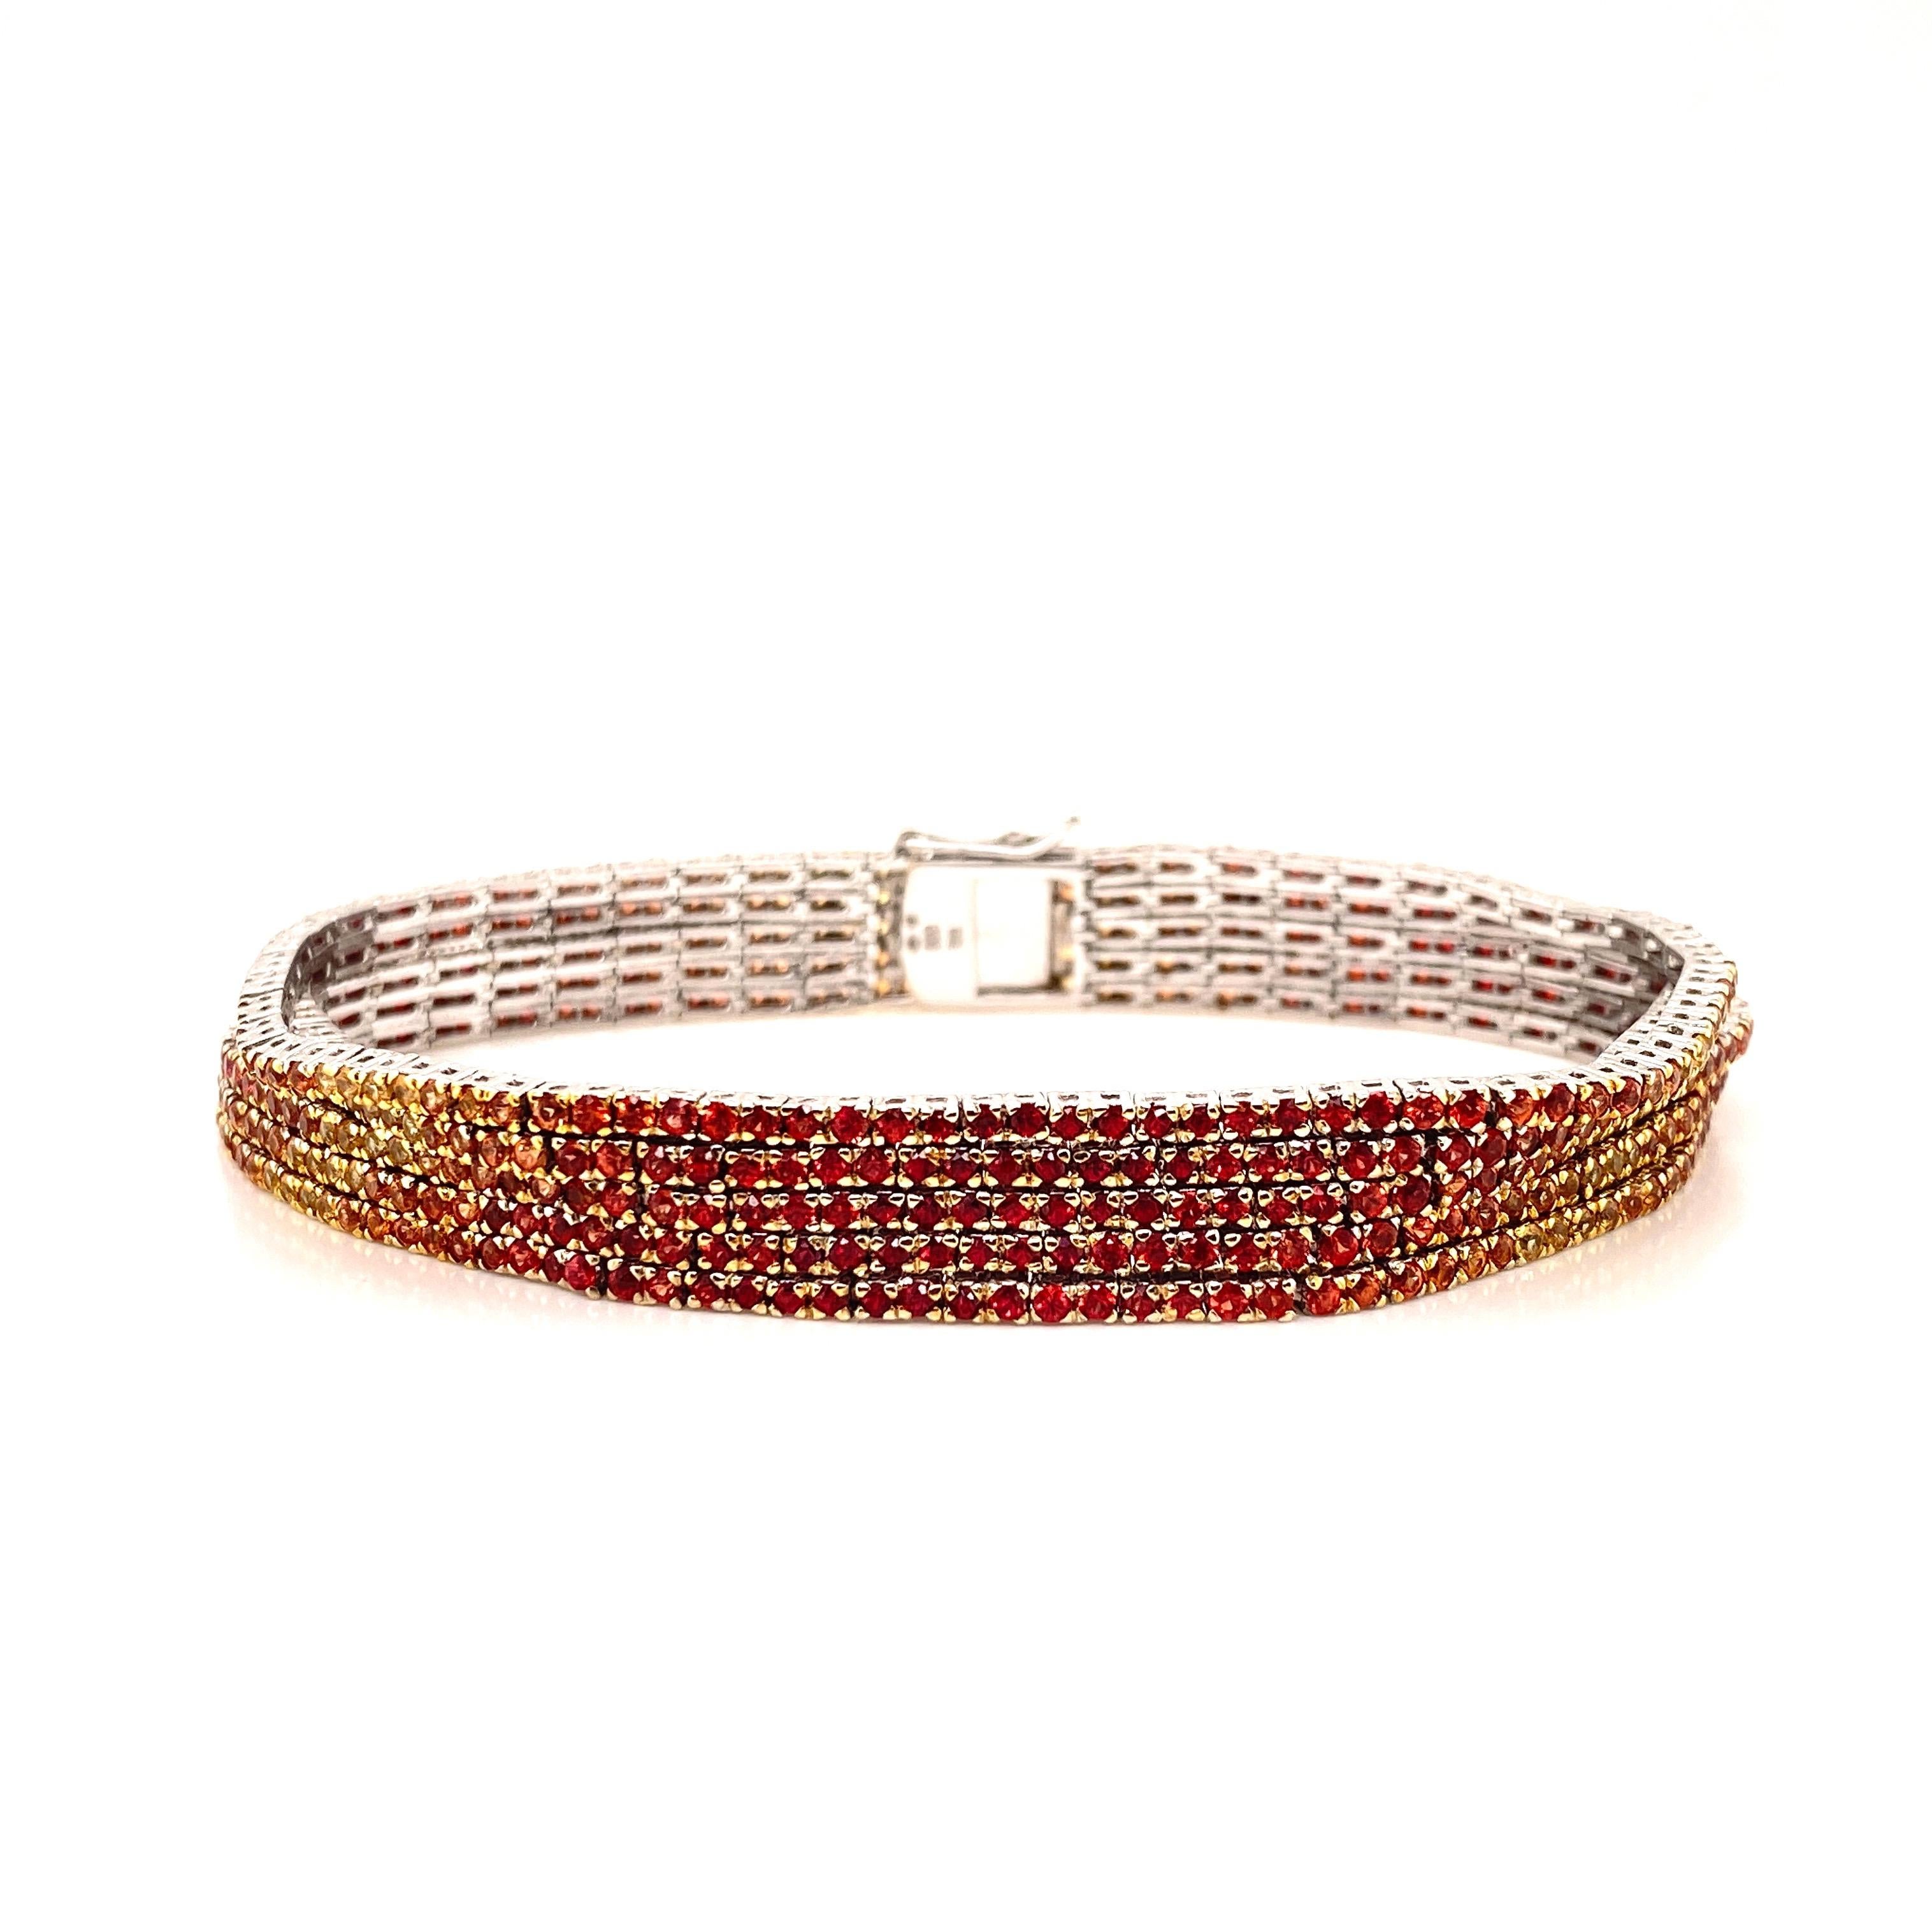 This stunning Orange Sapphire Bracelet features a spectrum of Round Orange, Red, and Yellow Sapphires.
This Bracelet is set in 18K White Gold —  is 7 inches in length and is secured with a box clasp.
Total Sapphire Weight = 10.60 Carats.
